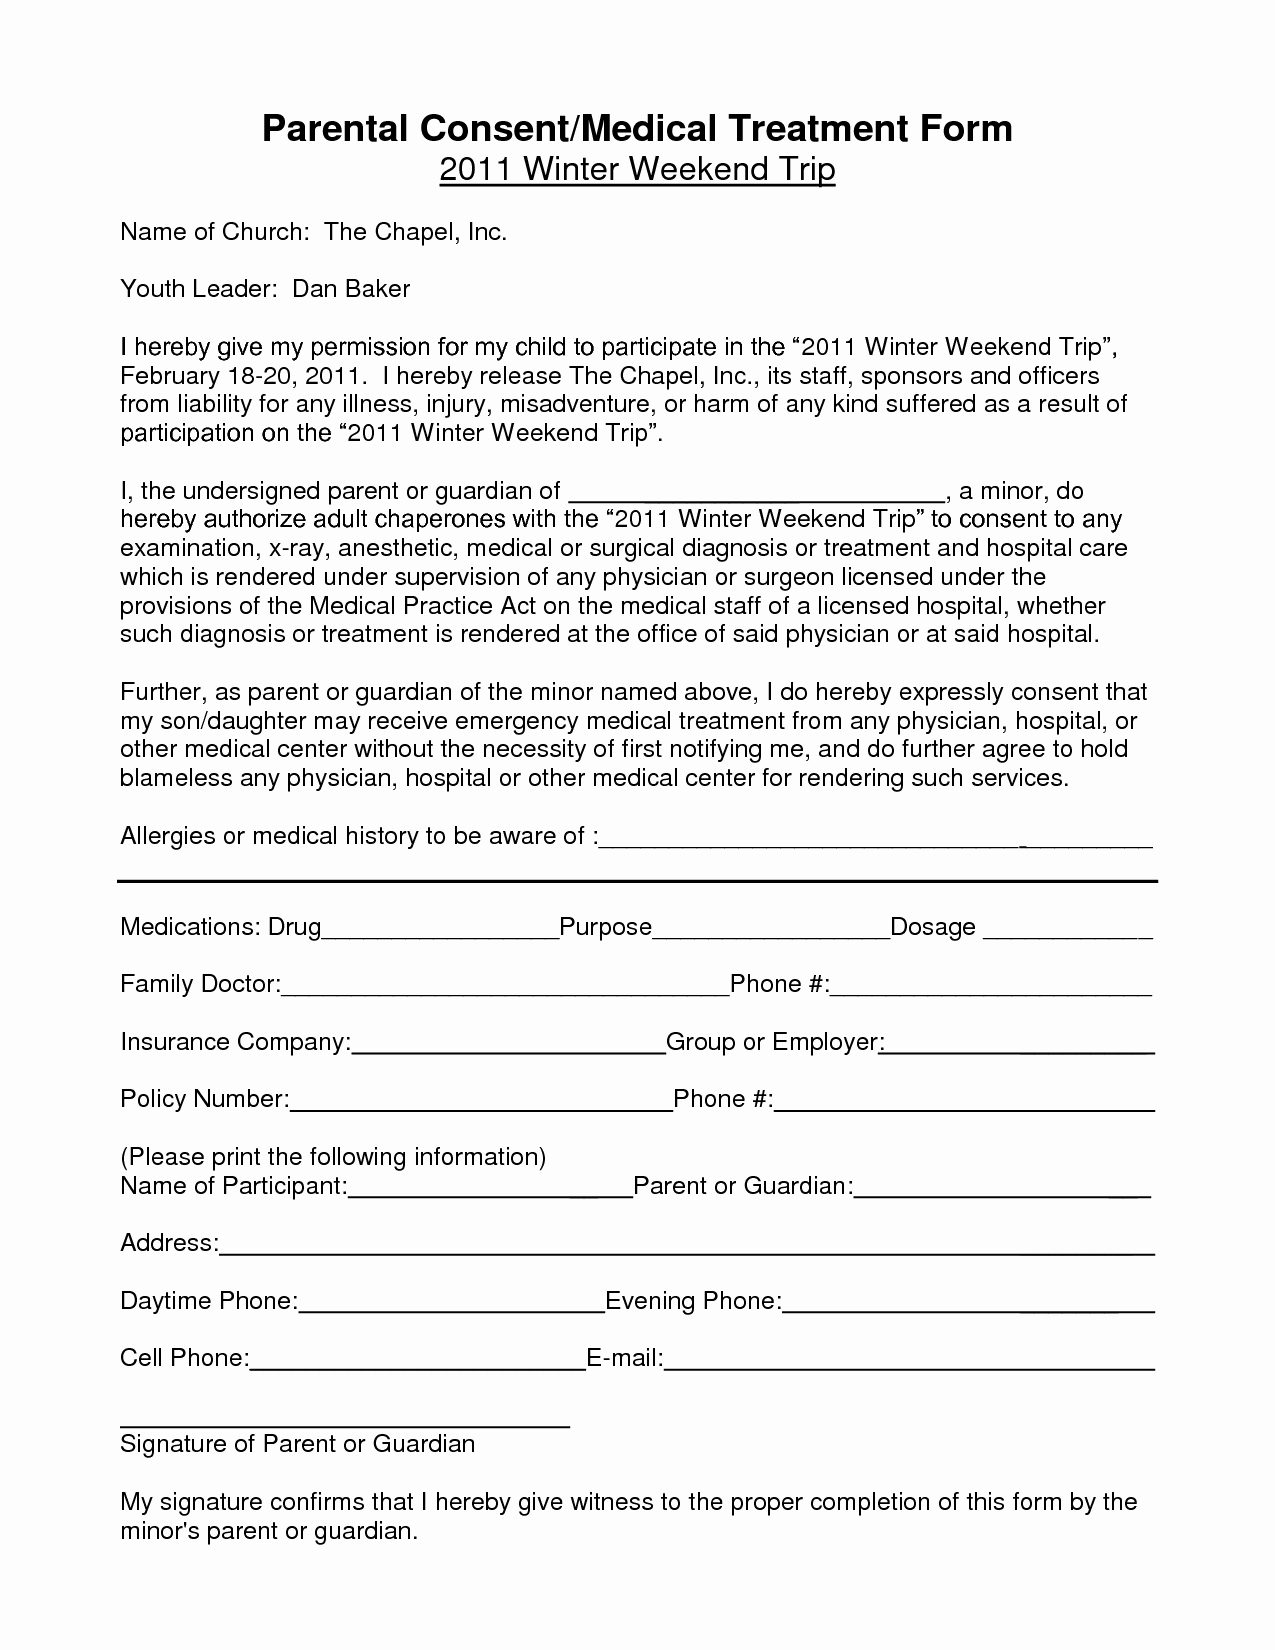 Child Travel Consent form Template Fresh Notarized Medical Consent form for Minor